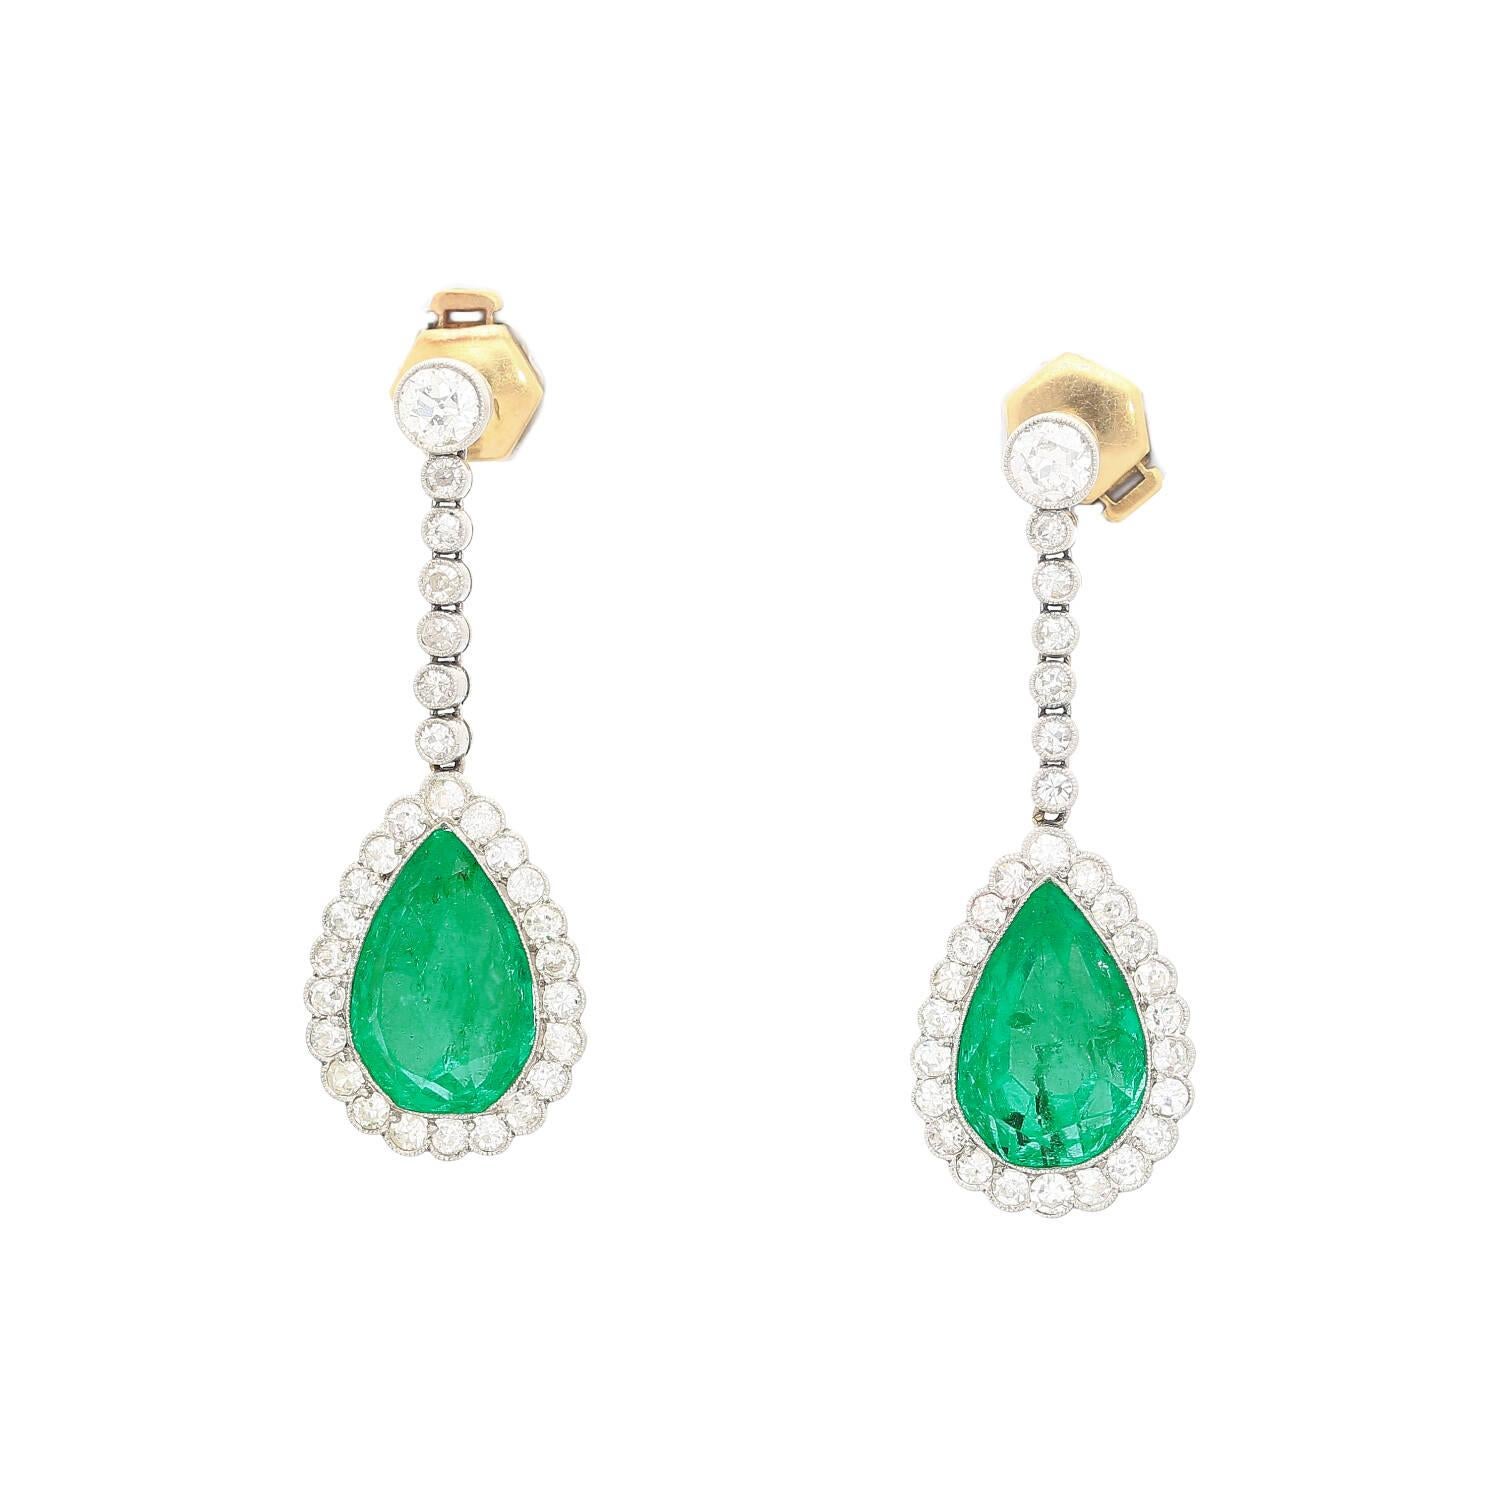 Natural 10-carat pear cut Colombian emerald and round cut diamond drop earrings in a platinum and gold setting. AGL Certified the center stone pair as natural emeralds, Colombian origin, and bearing minor oil. Mounted with a gold prong setting that